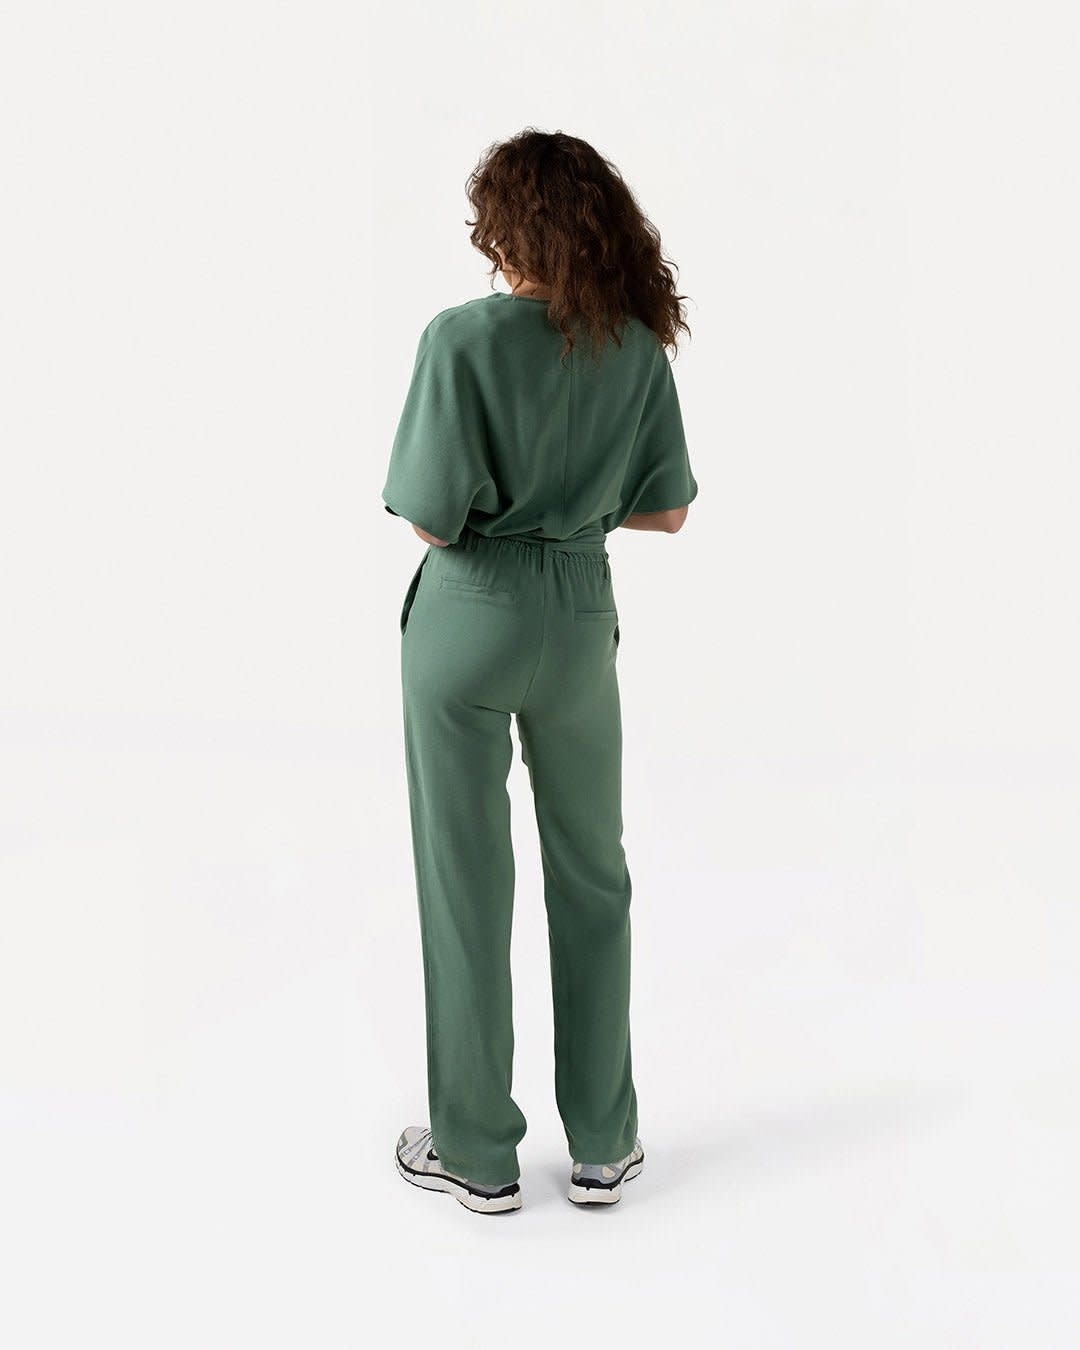 Another-Label Another-Label, Nena jumpsuit s/s, duck green, L